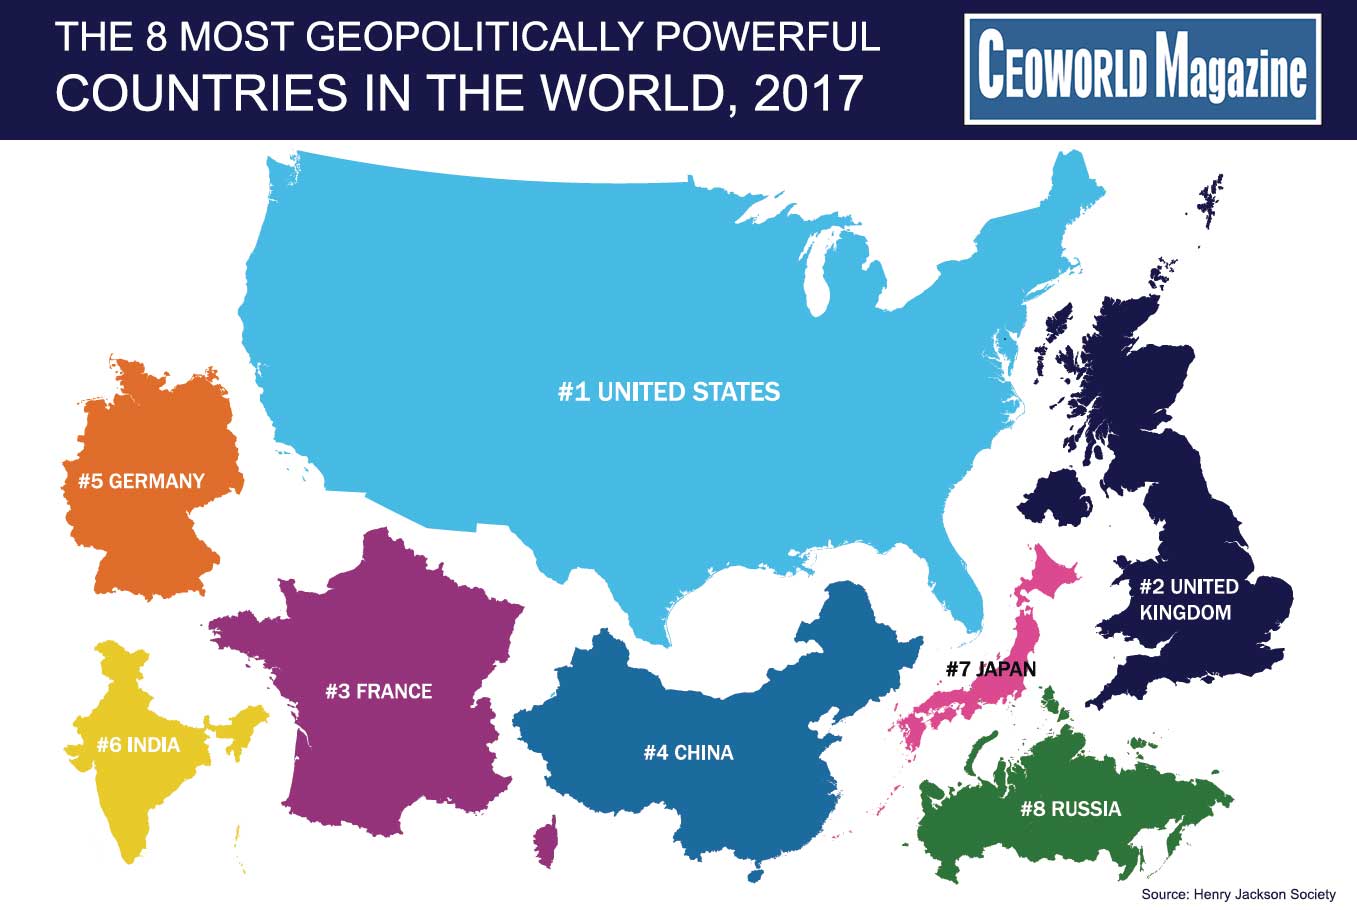 RANKED The 8 most geopolitically powerful countries in the world, 2017